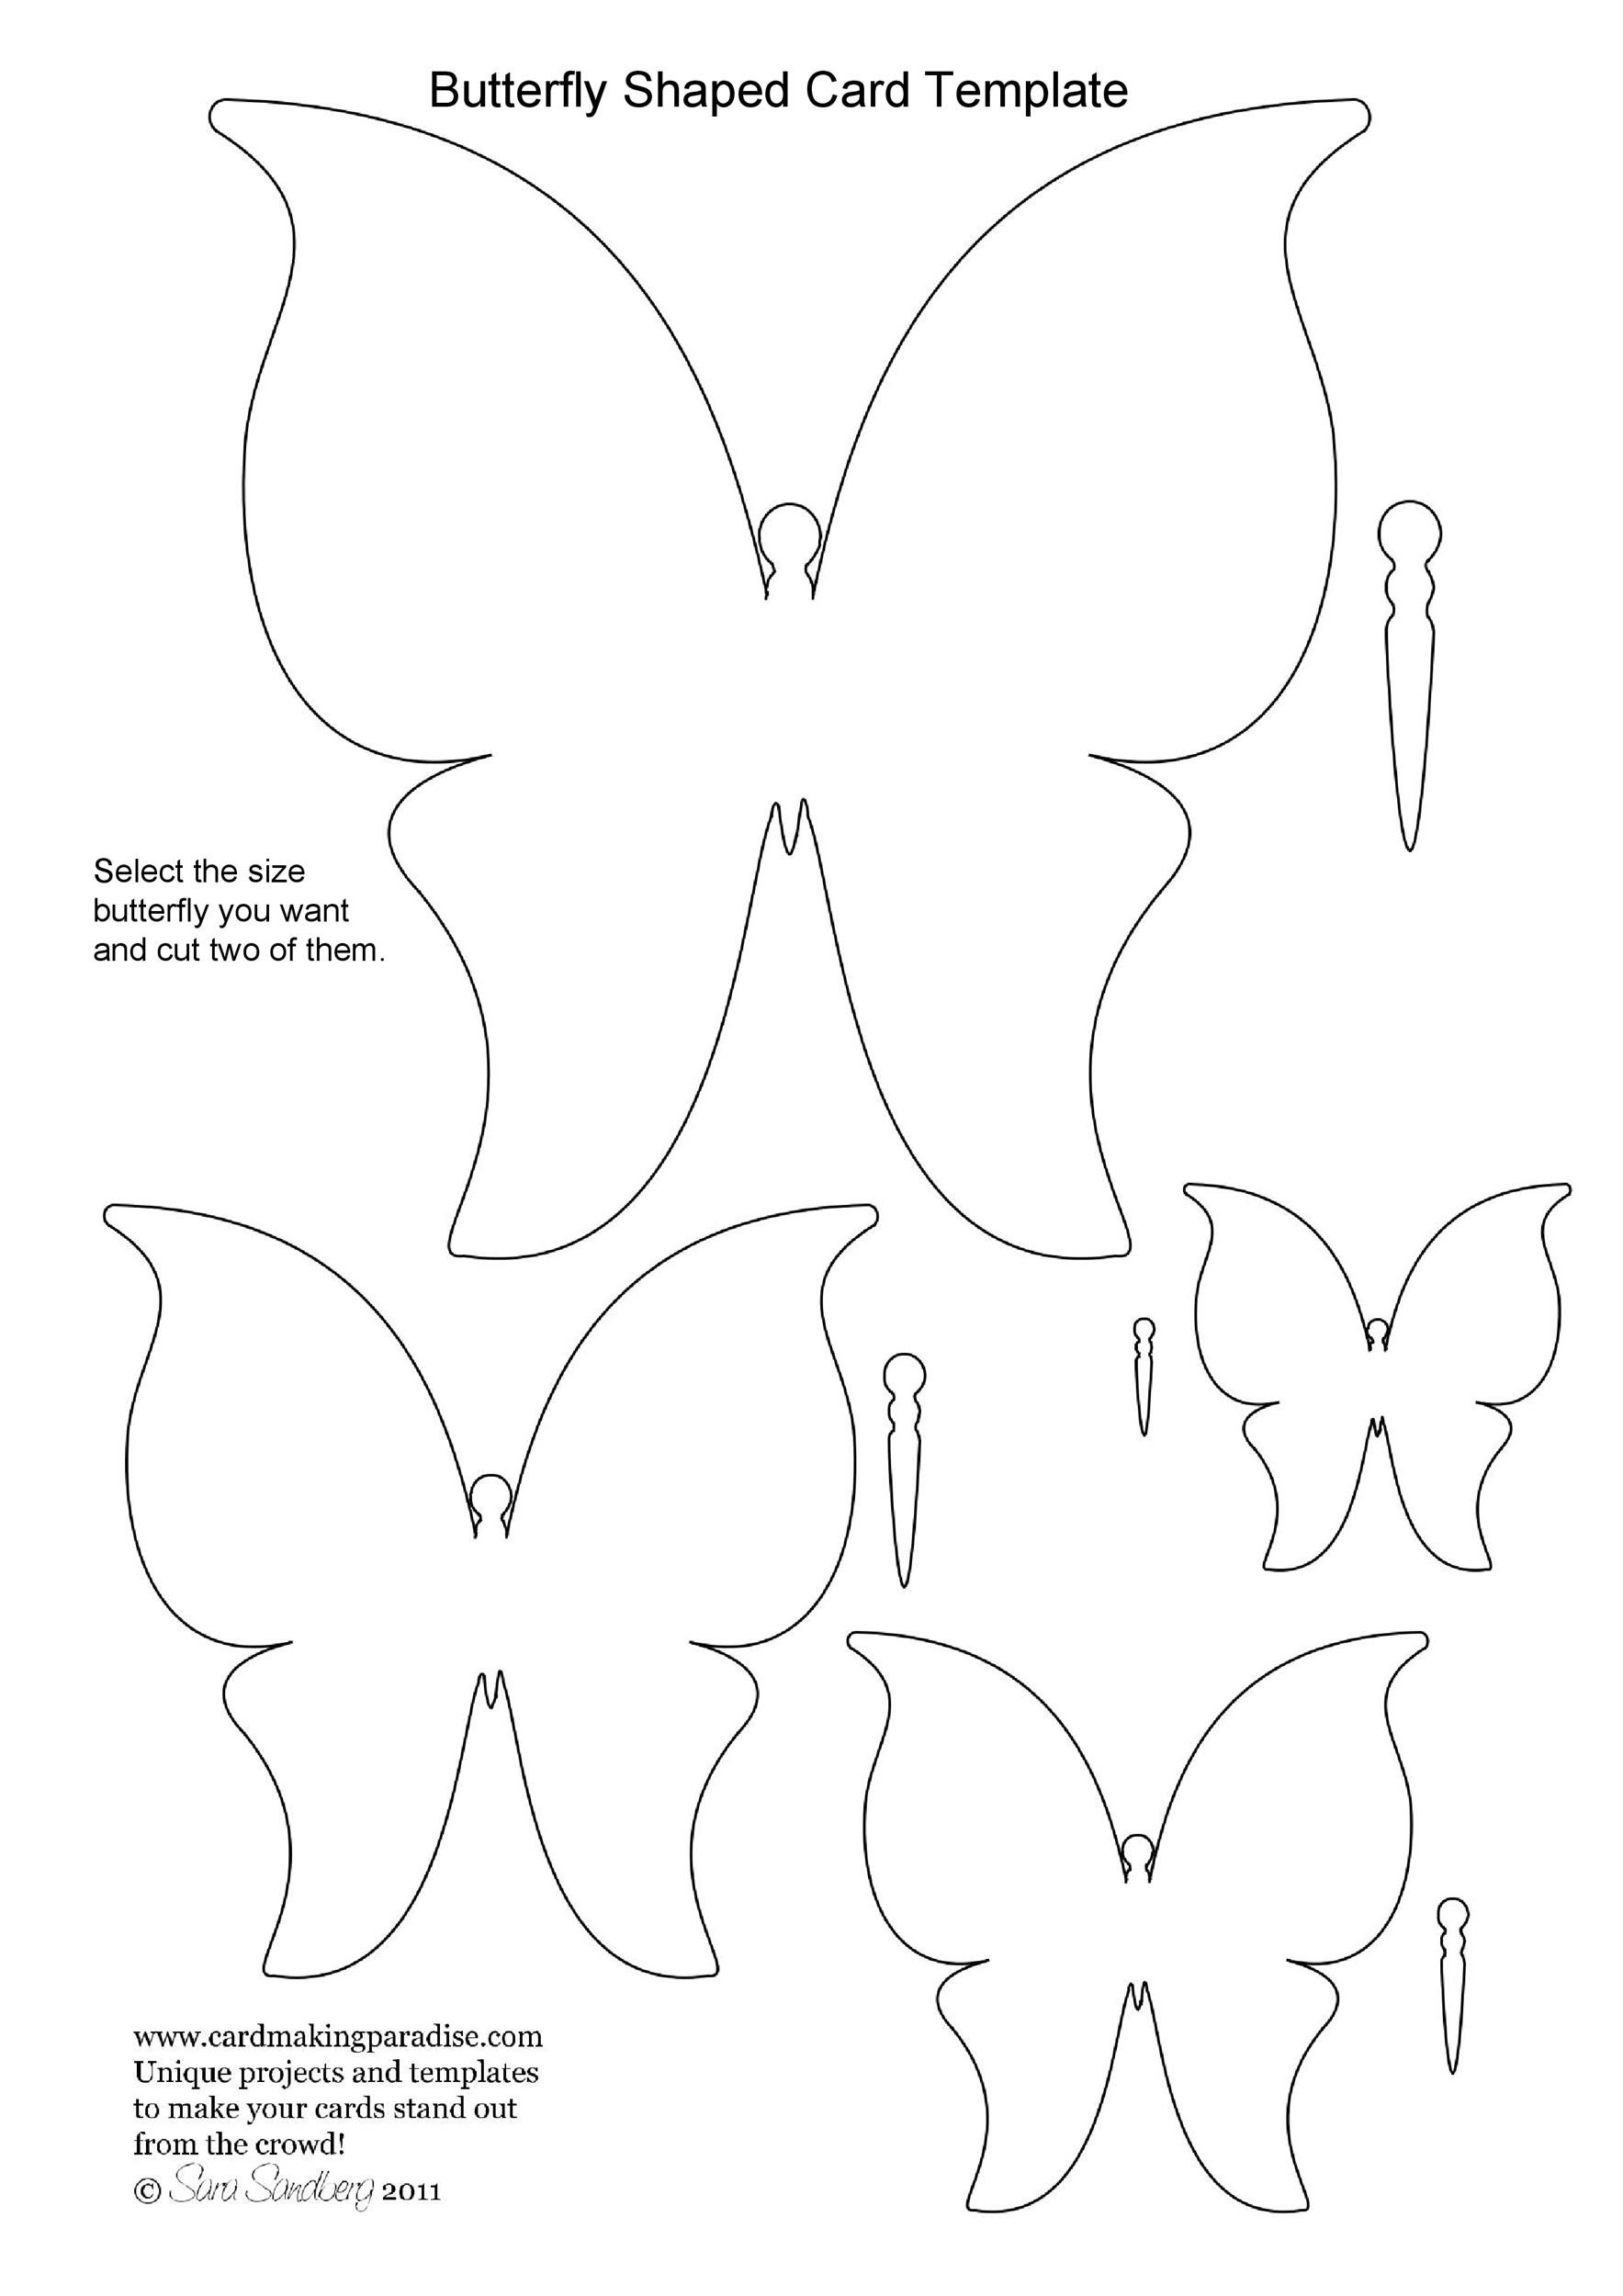 50 Printable & Cut Out Butterfly Templates 🦋 ᐅ TemplateLab